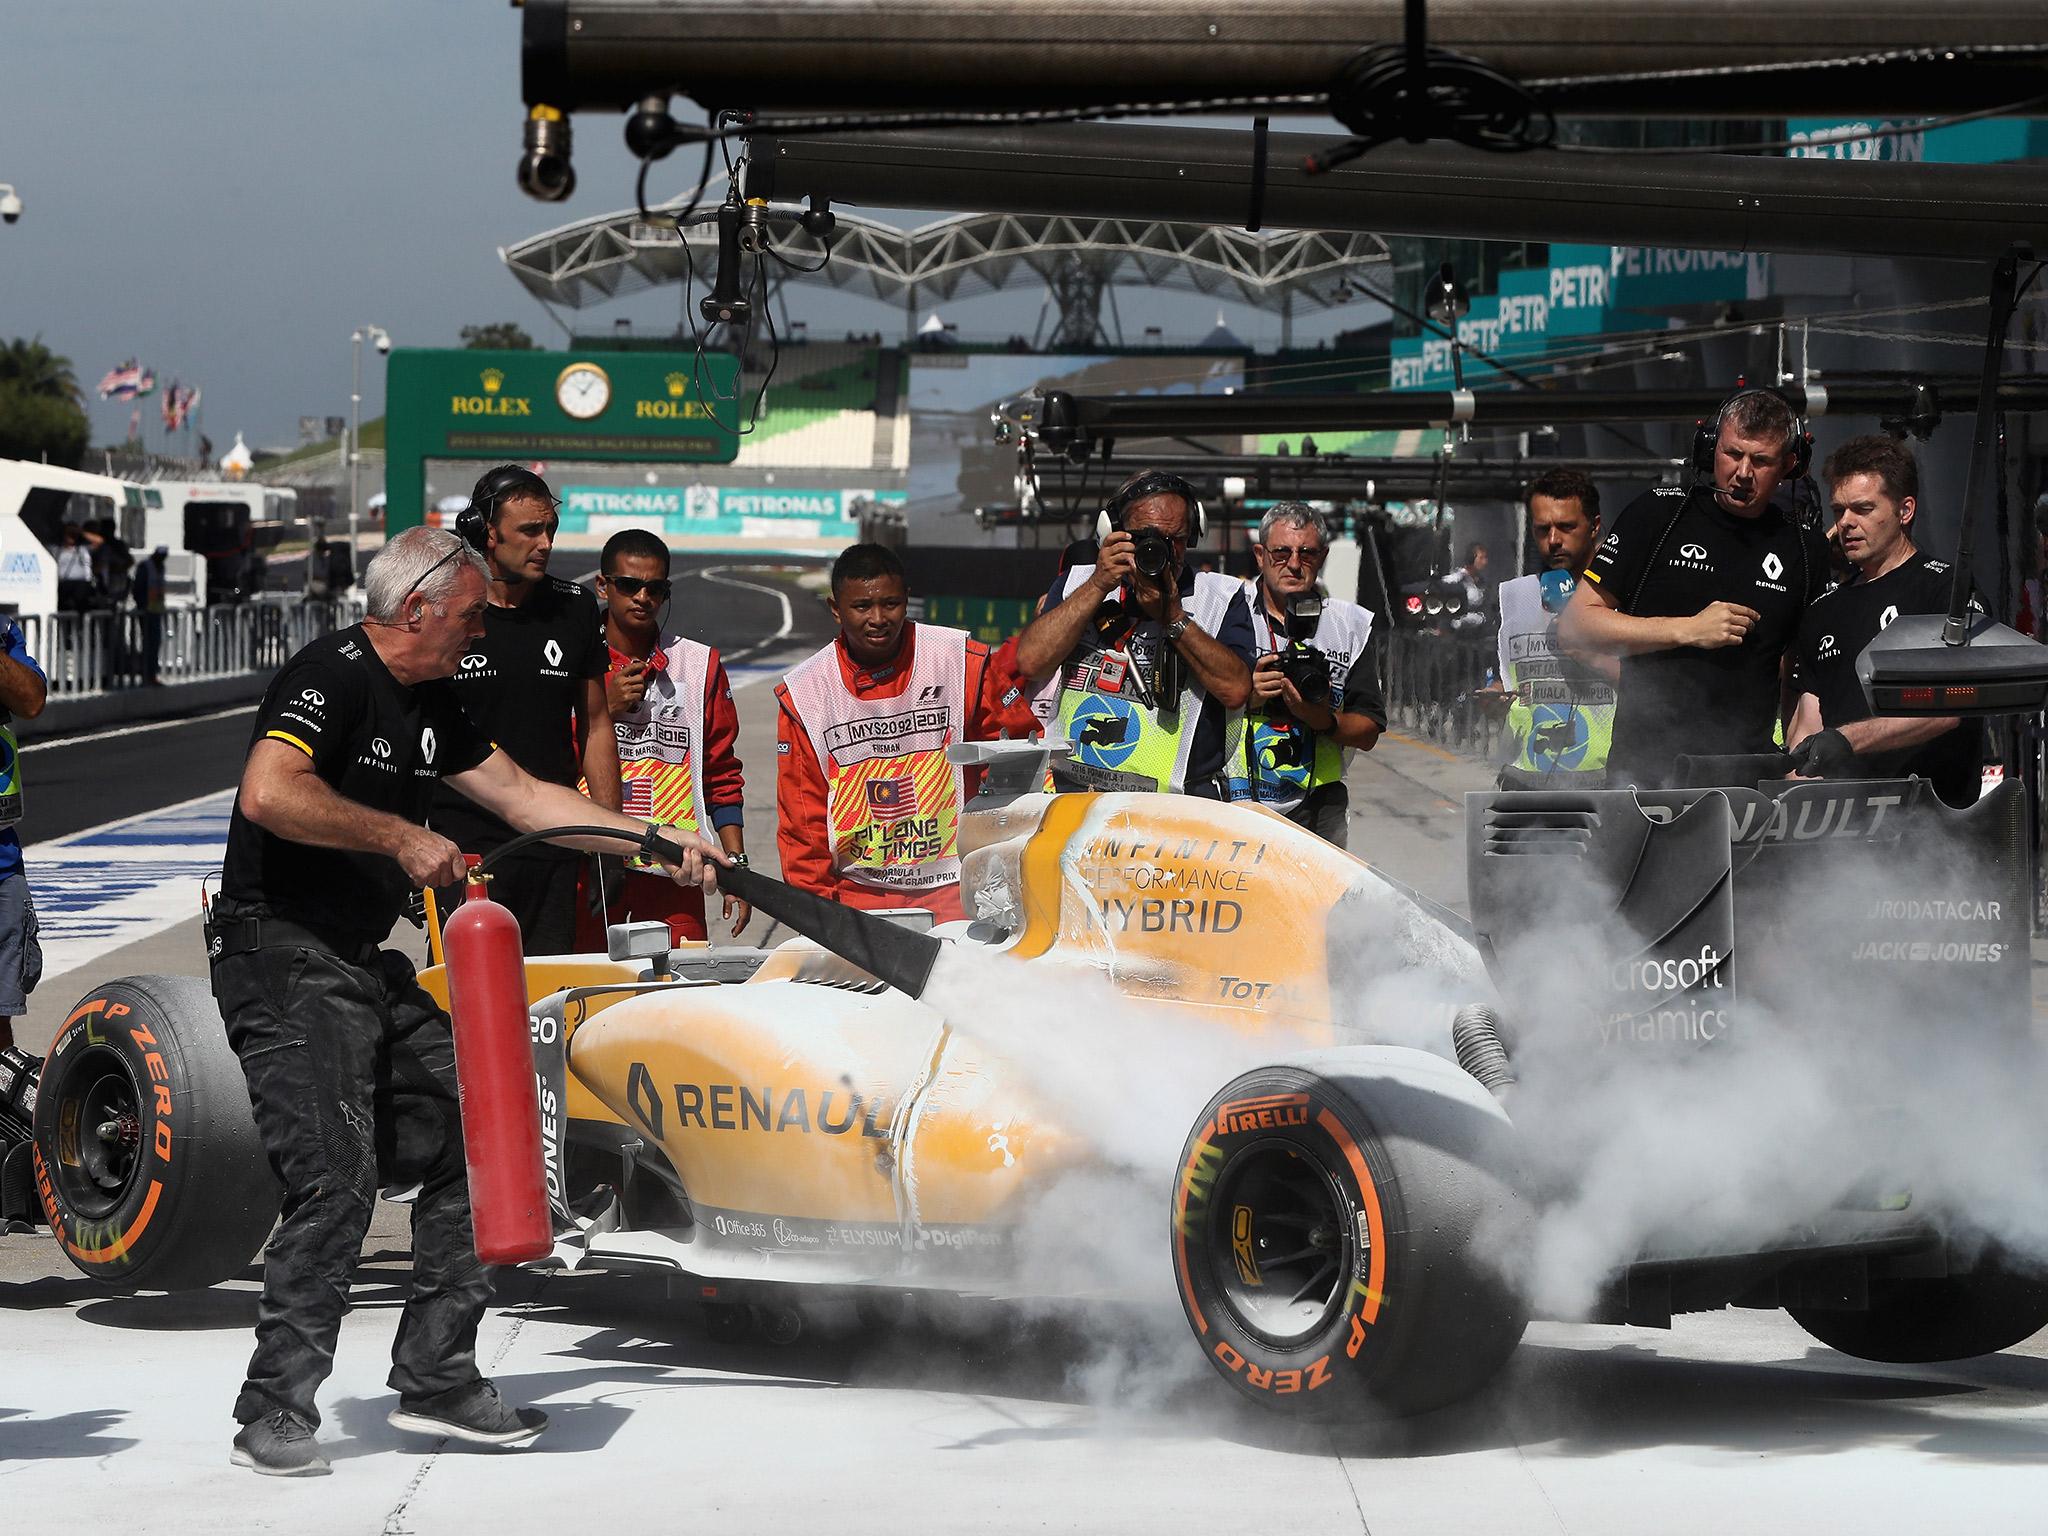 &#13;
Fuel leaked all over the Renault which resulted in the fire &#13;